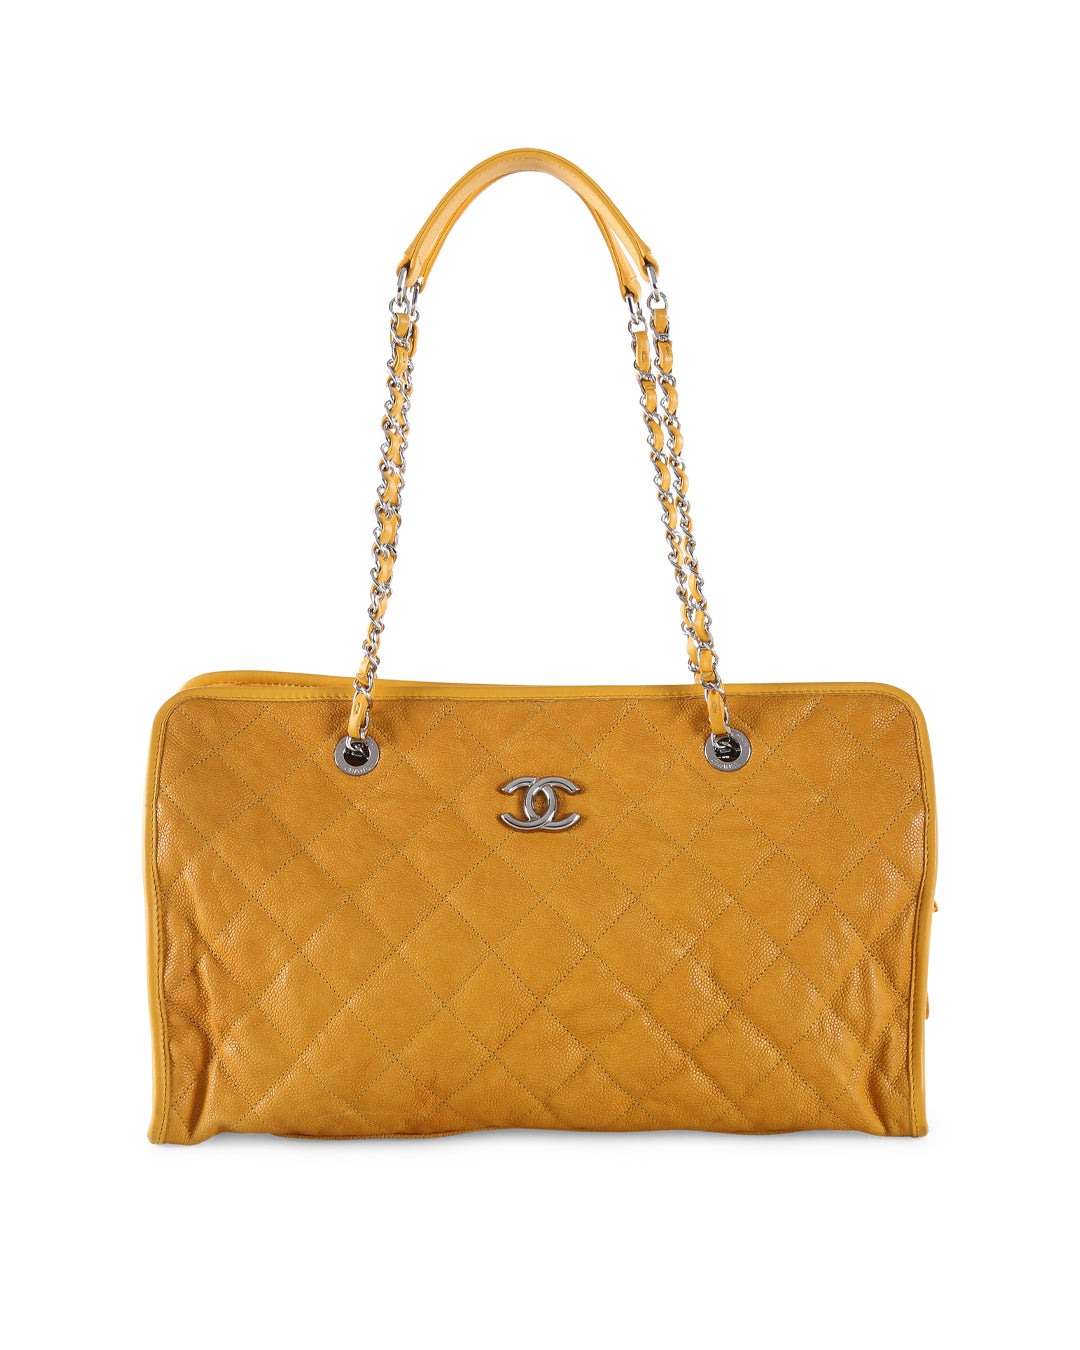 CHANEL Yellow Caviar Leather French Riviera Large Tote Bag